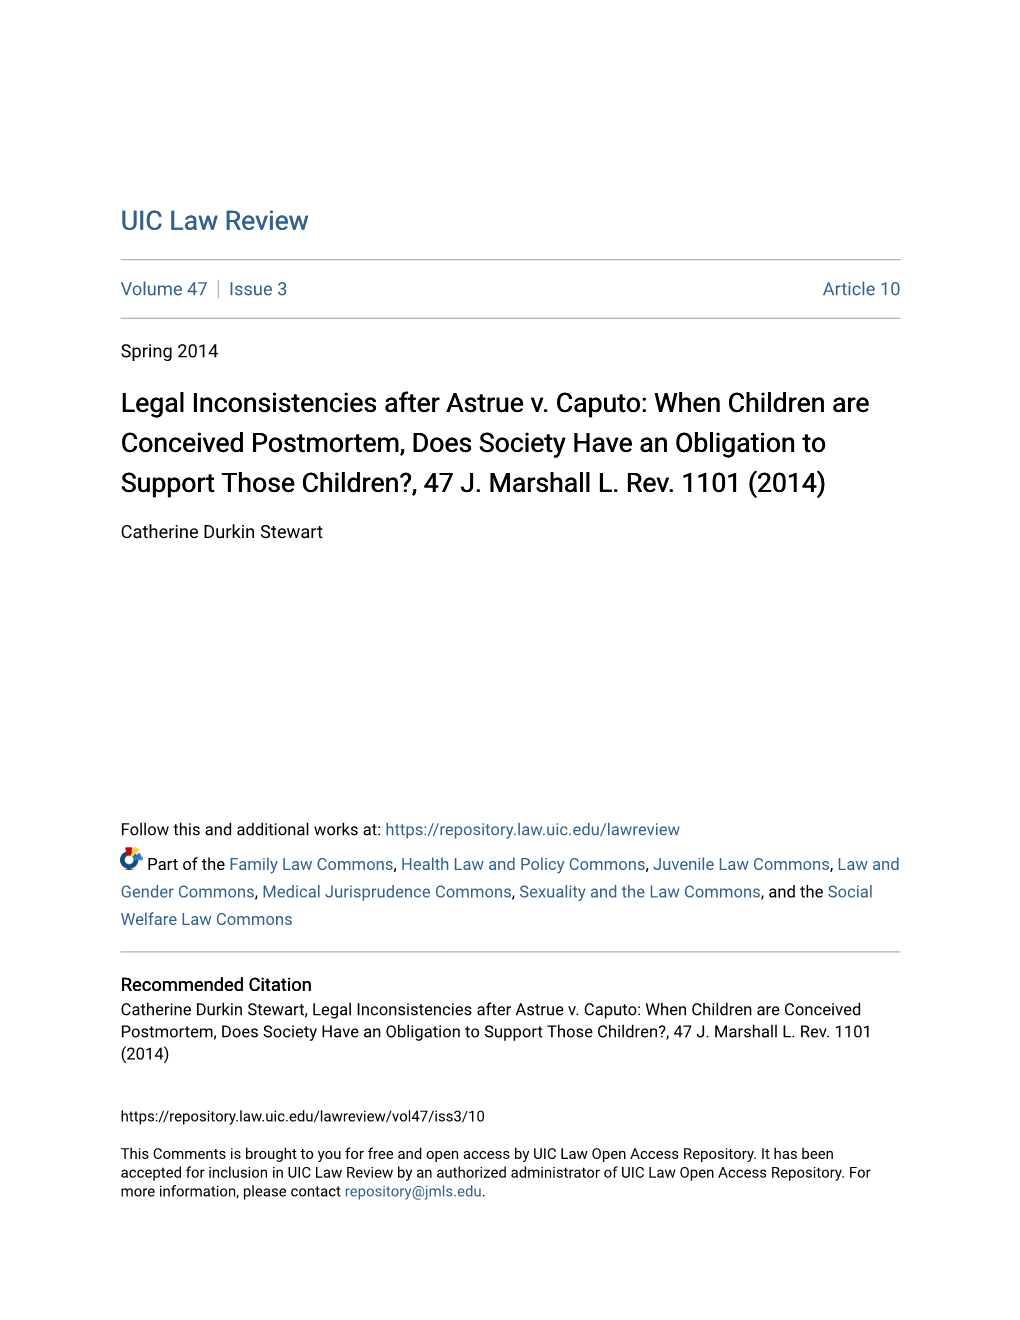 Legal Inconsistencies After Astrue V. Caputo: When Children Are Conceived Postmortem, Does Society Have an Obligation to Support Those Children?, 47 J